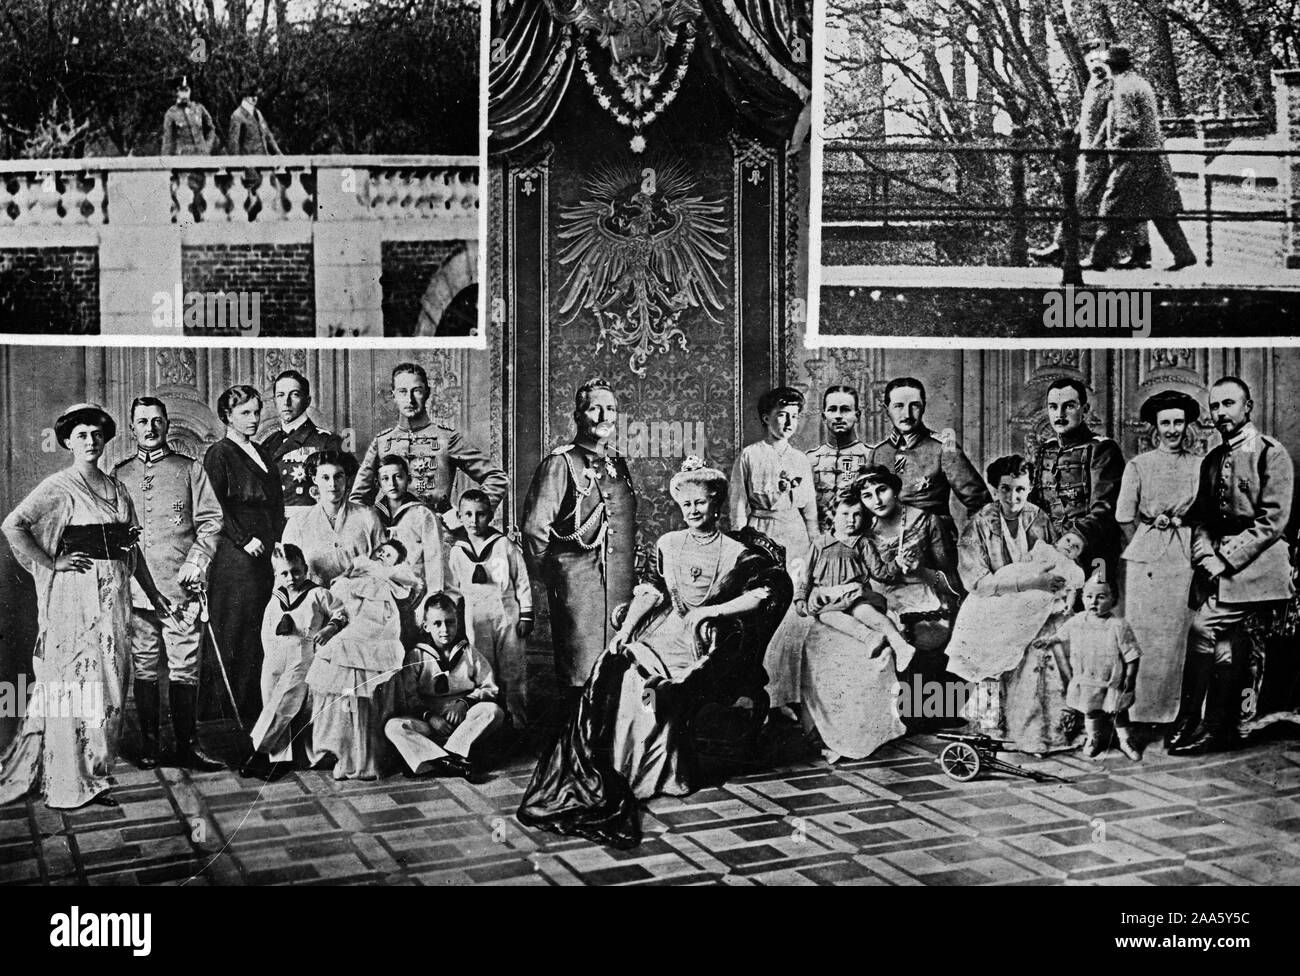 The end of the war and the abdication of Emperor Wilhelm, marked the end of the family of Hohenzollerns in the limelight of German society and royalty. The group photo shows the Hohenzollern family at the height of their popularity, and from right to left they are:-- Prince Oscar and wife, the Duke of Brunswick, his wife and two children; Prince August Wilhelm, wife and child; Prince Joachim and wife; the ex-Kaiserin and ex-Kaiser Wilhelm; the ex-Crown Prince, his wife and five children; Prince Adelburt and wife; Prince Eitel Frederick and his wife (now divorced) Stock Photo